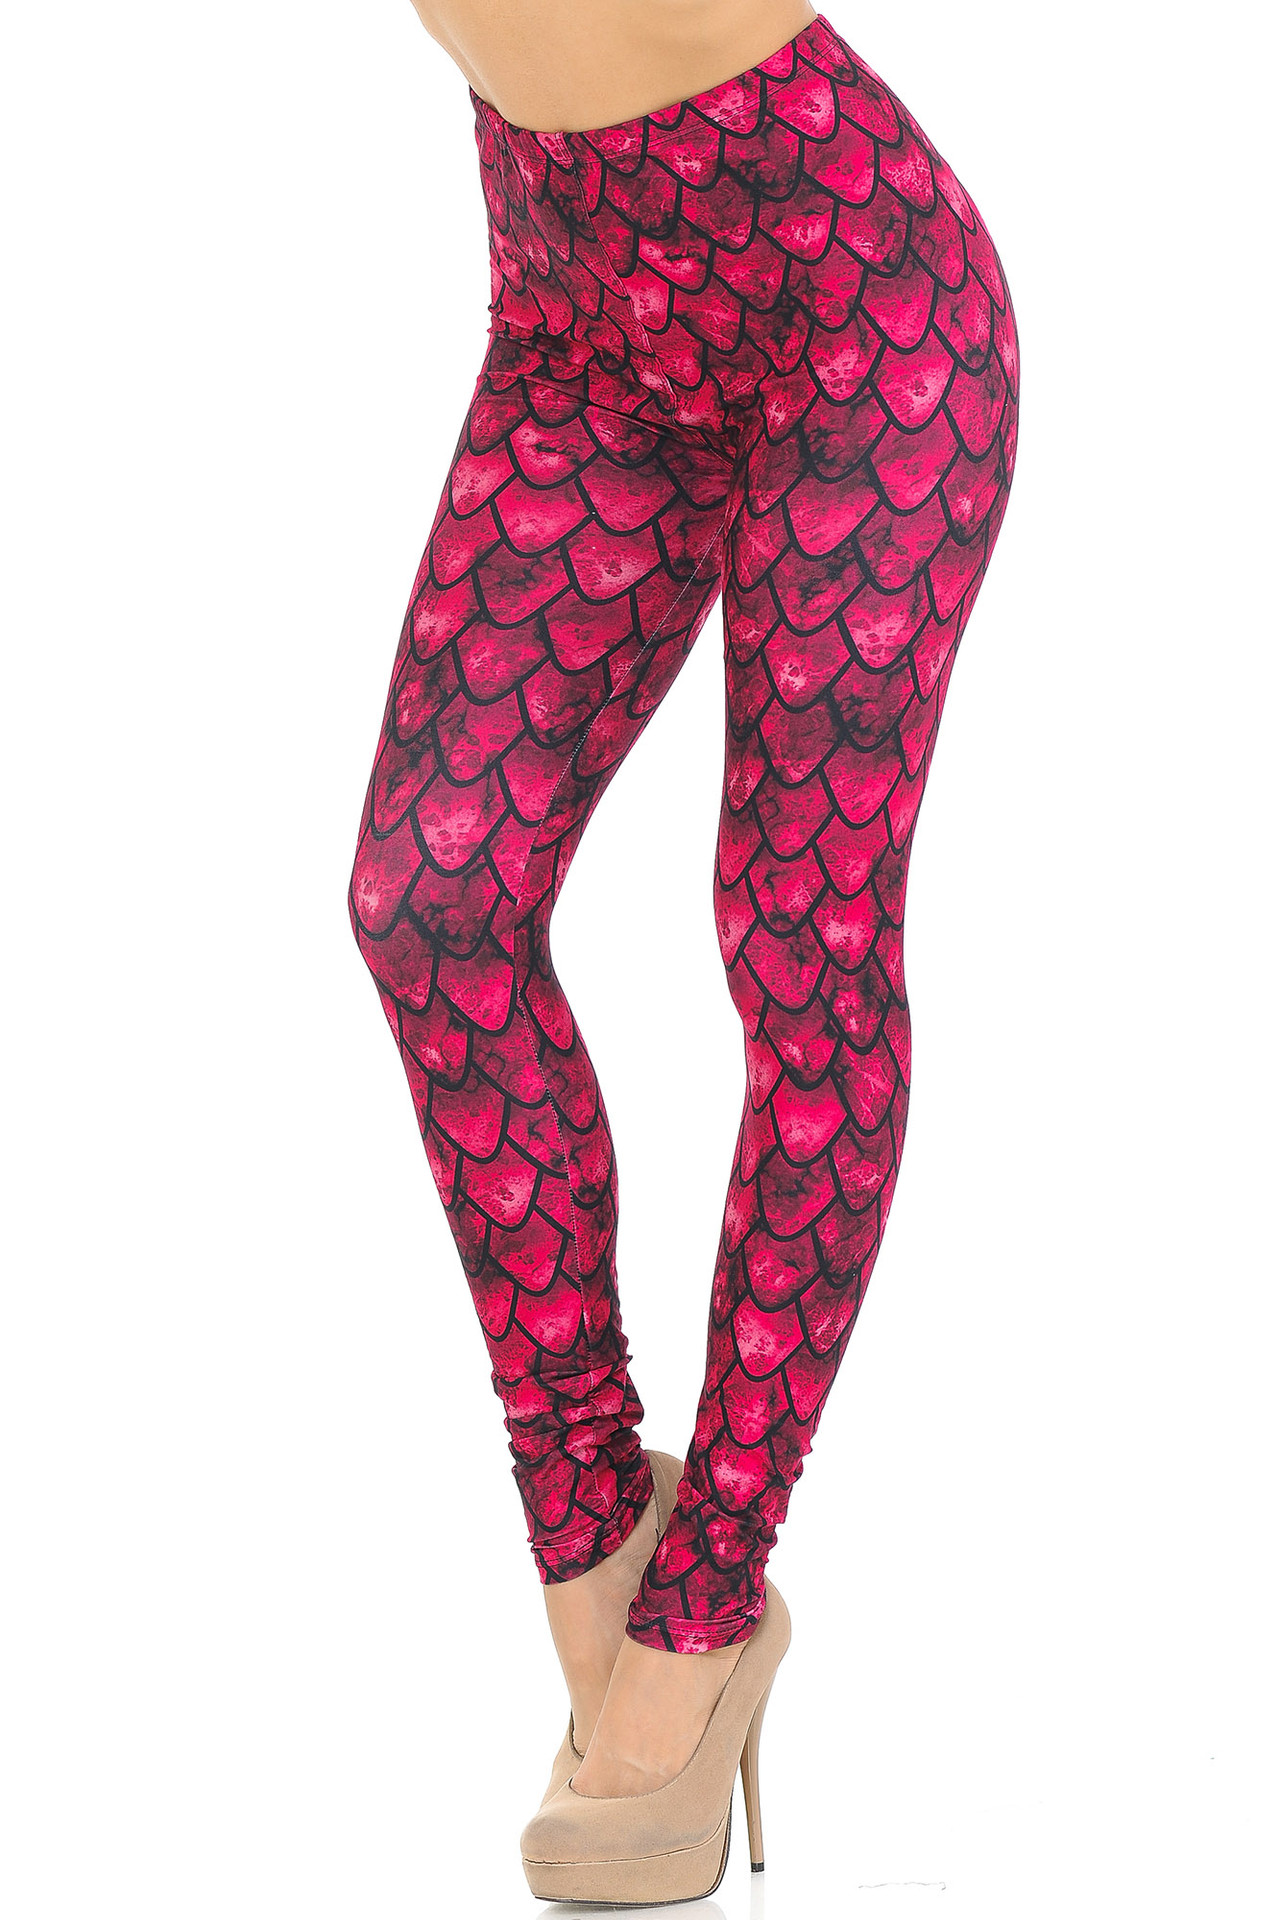 https://cdn11.bigcommerce.com/s-9th3f116/images/stencil/1280x2250/products/24477/126383/Red-Scale-Leggings-USA-Fashion_1__33234__82981.1603390340.jpg?c=2